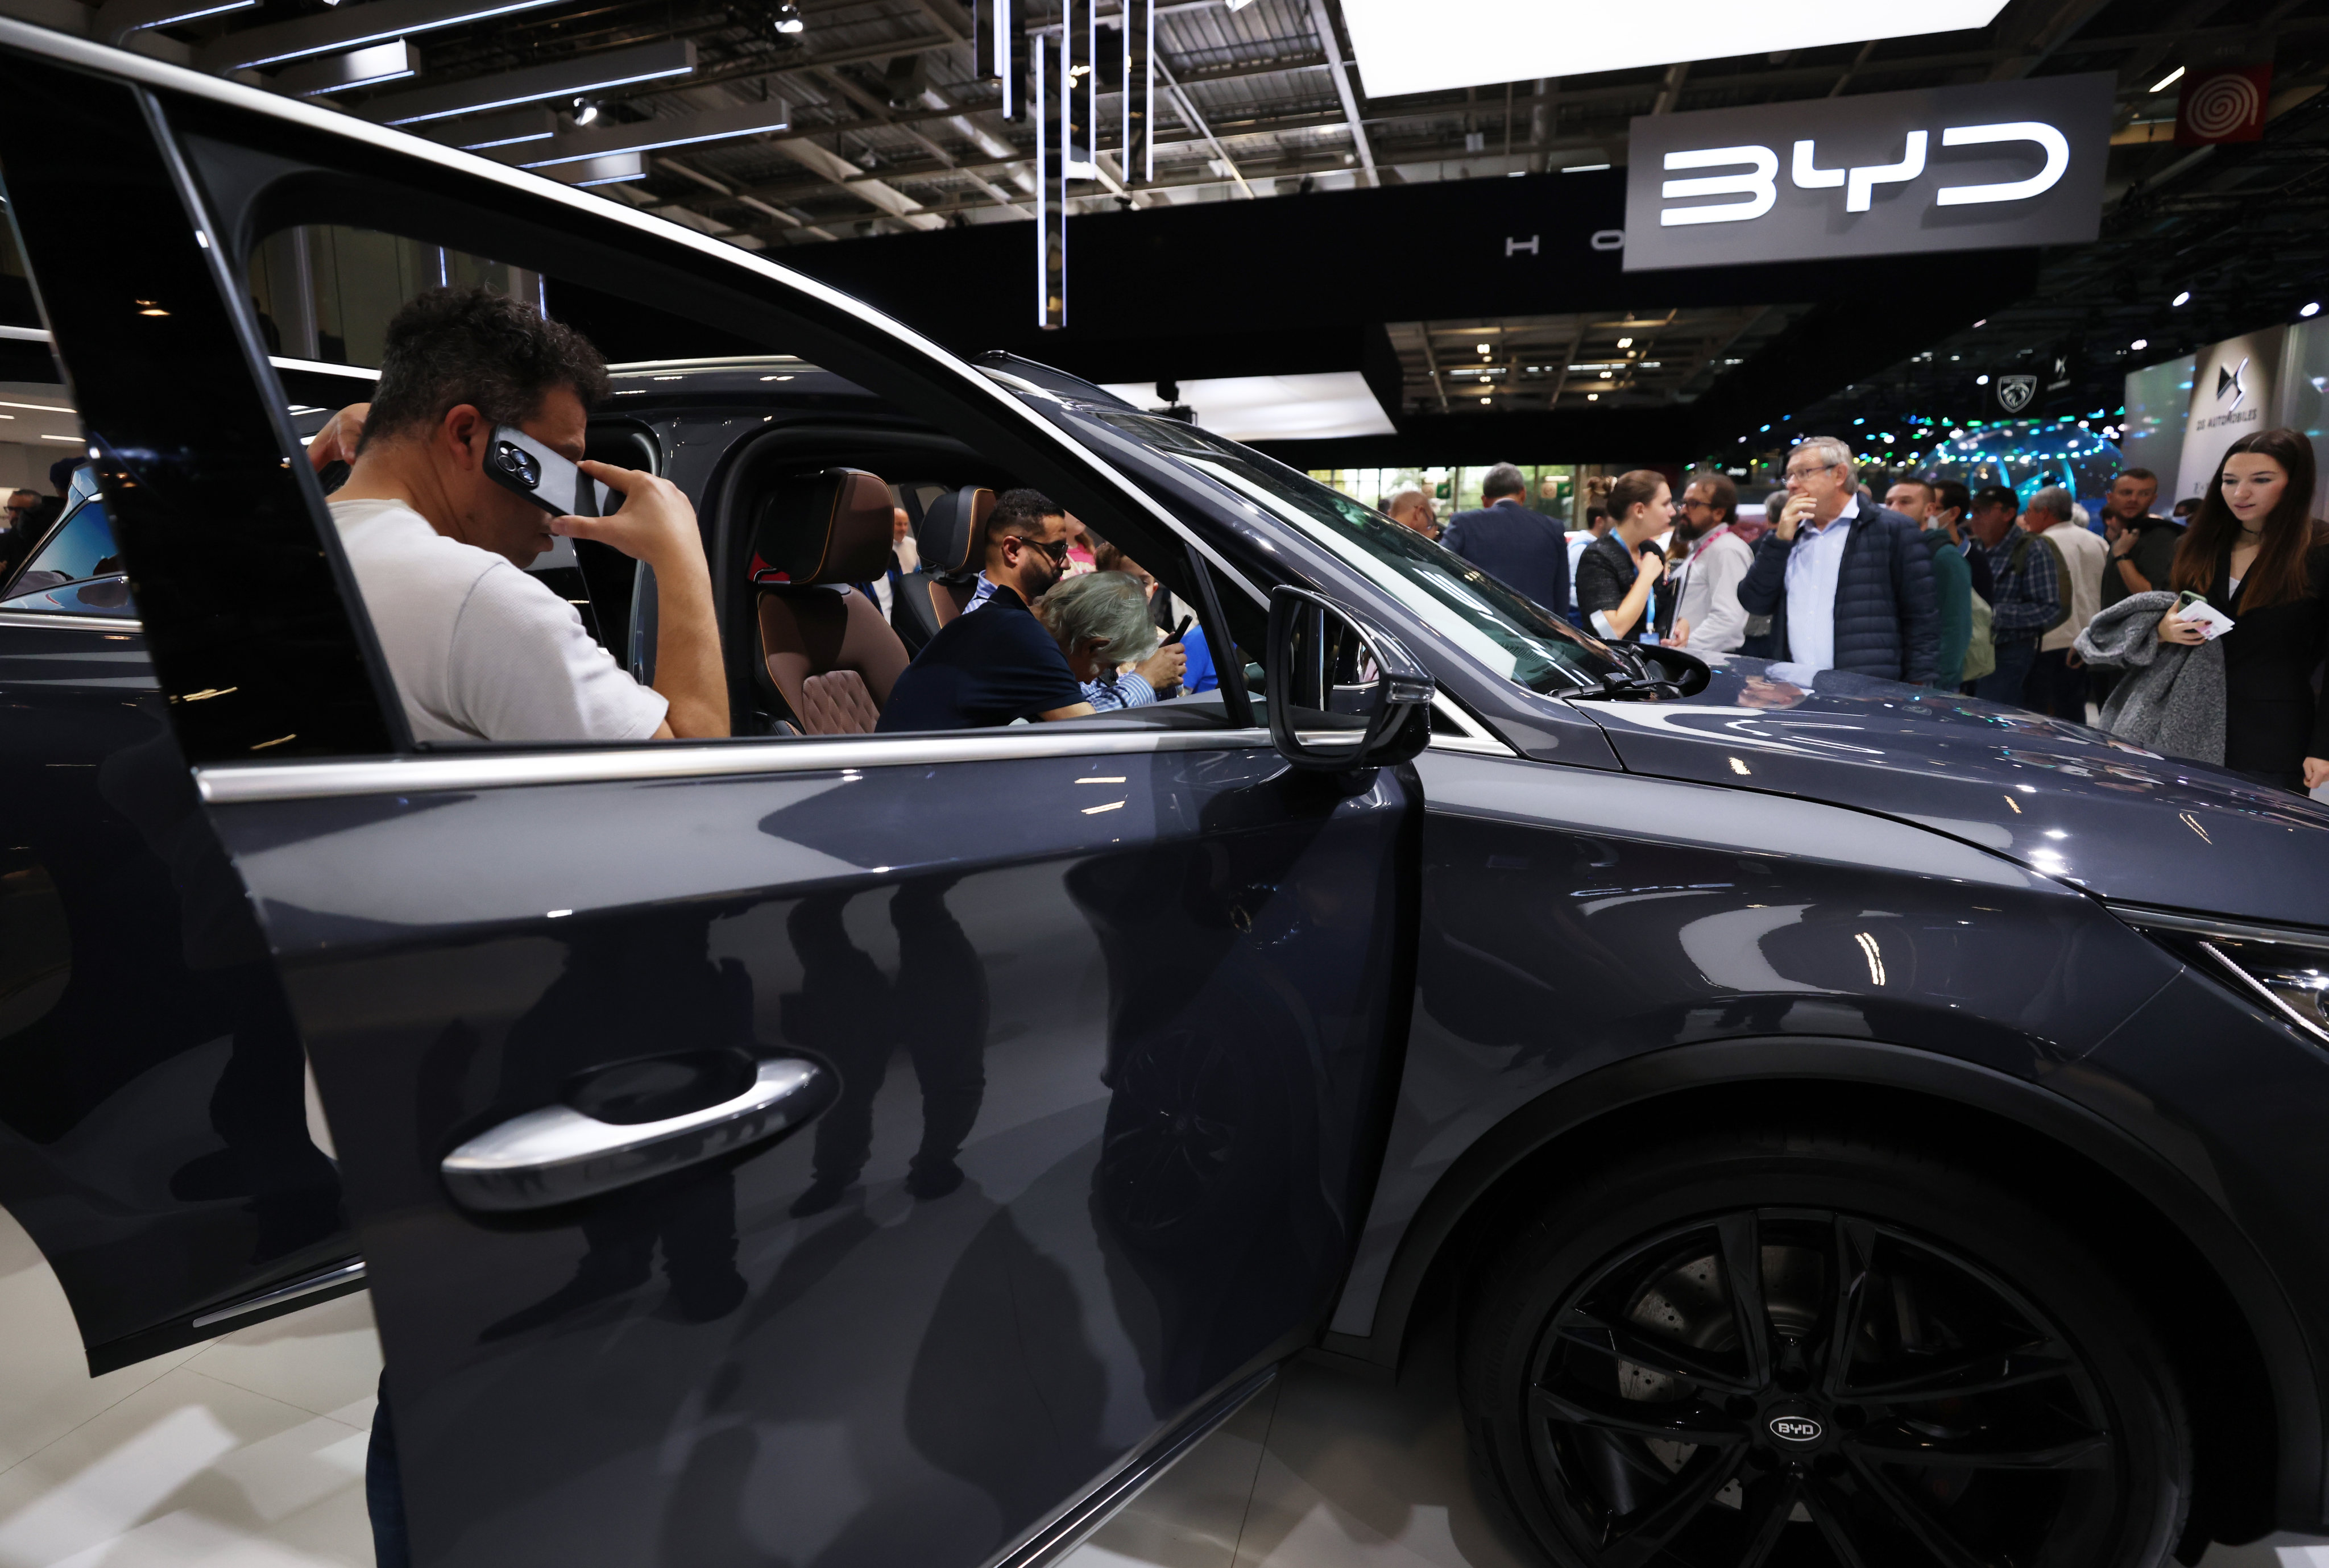 People visit the BYD stand during the Paris Motor Show in October last year. Photo: Xinhua